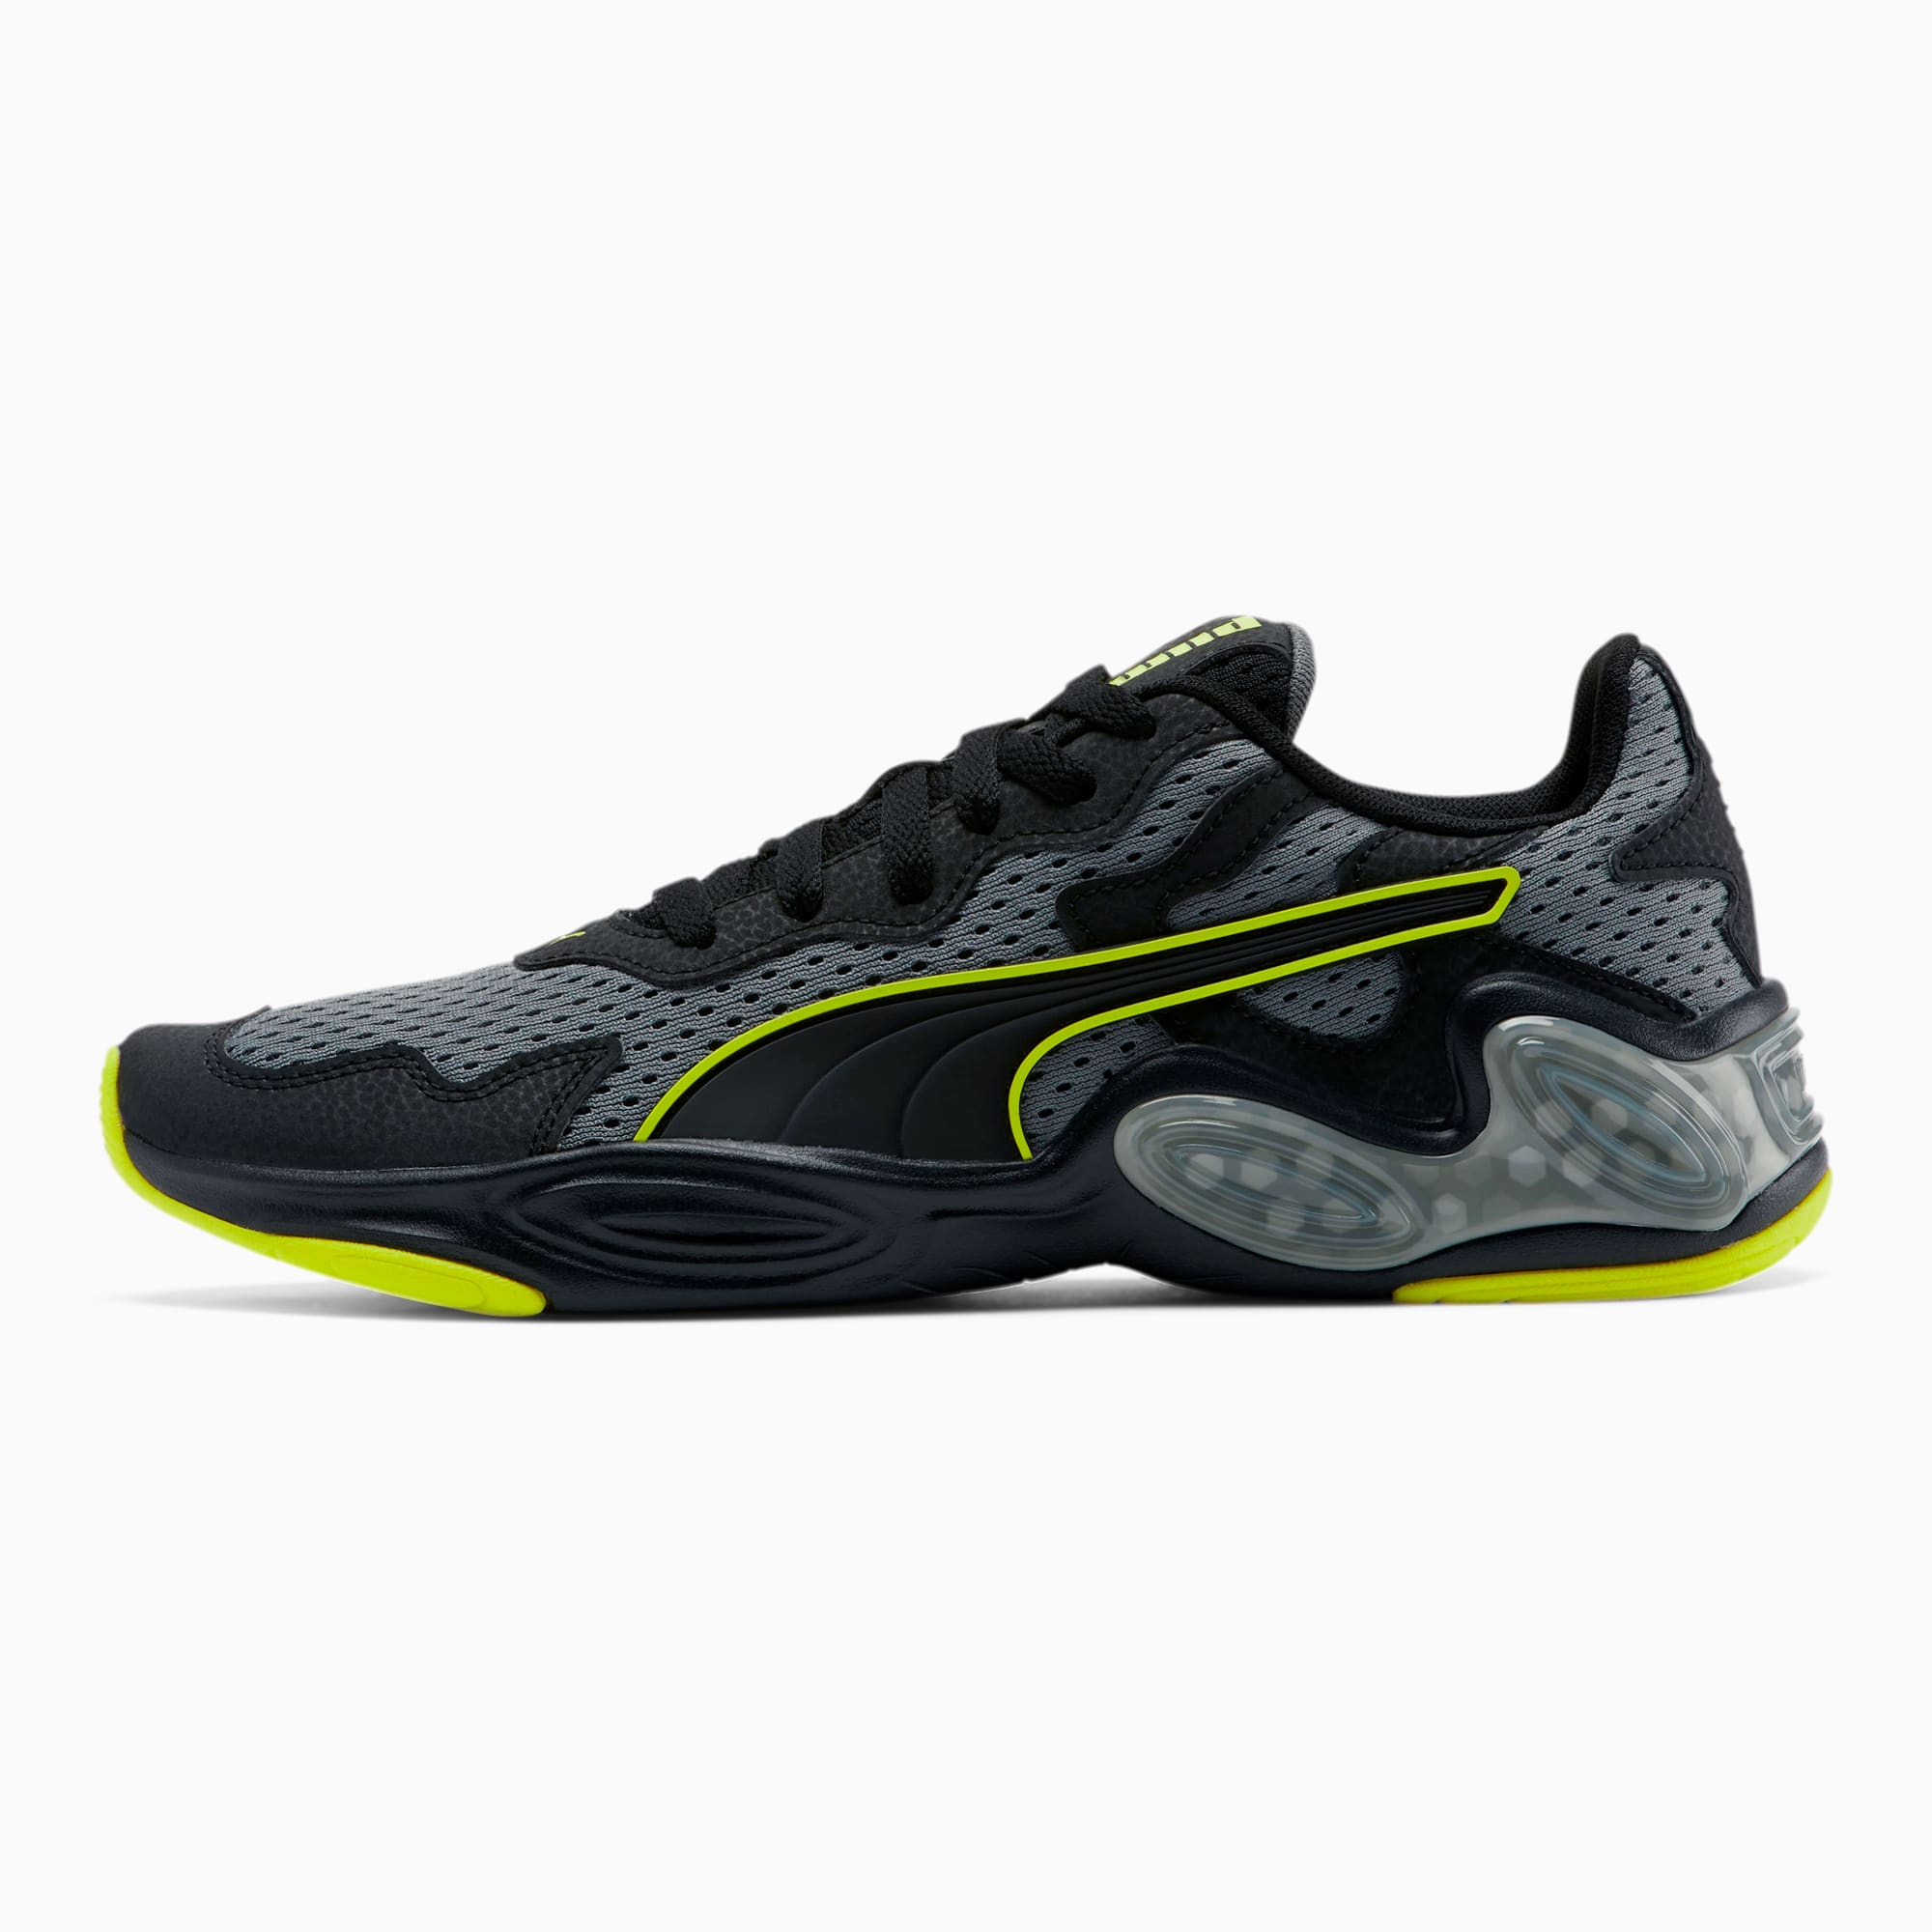 puma 10cell running shoes review